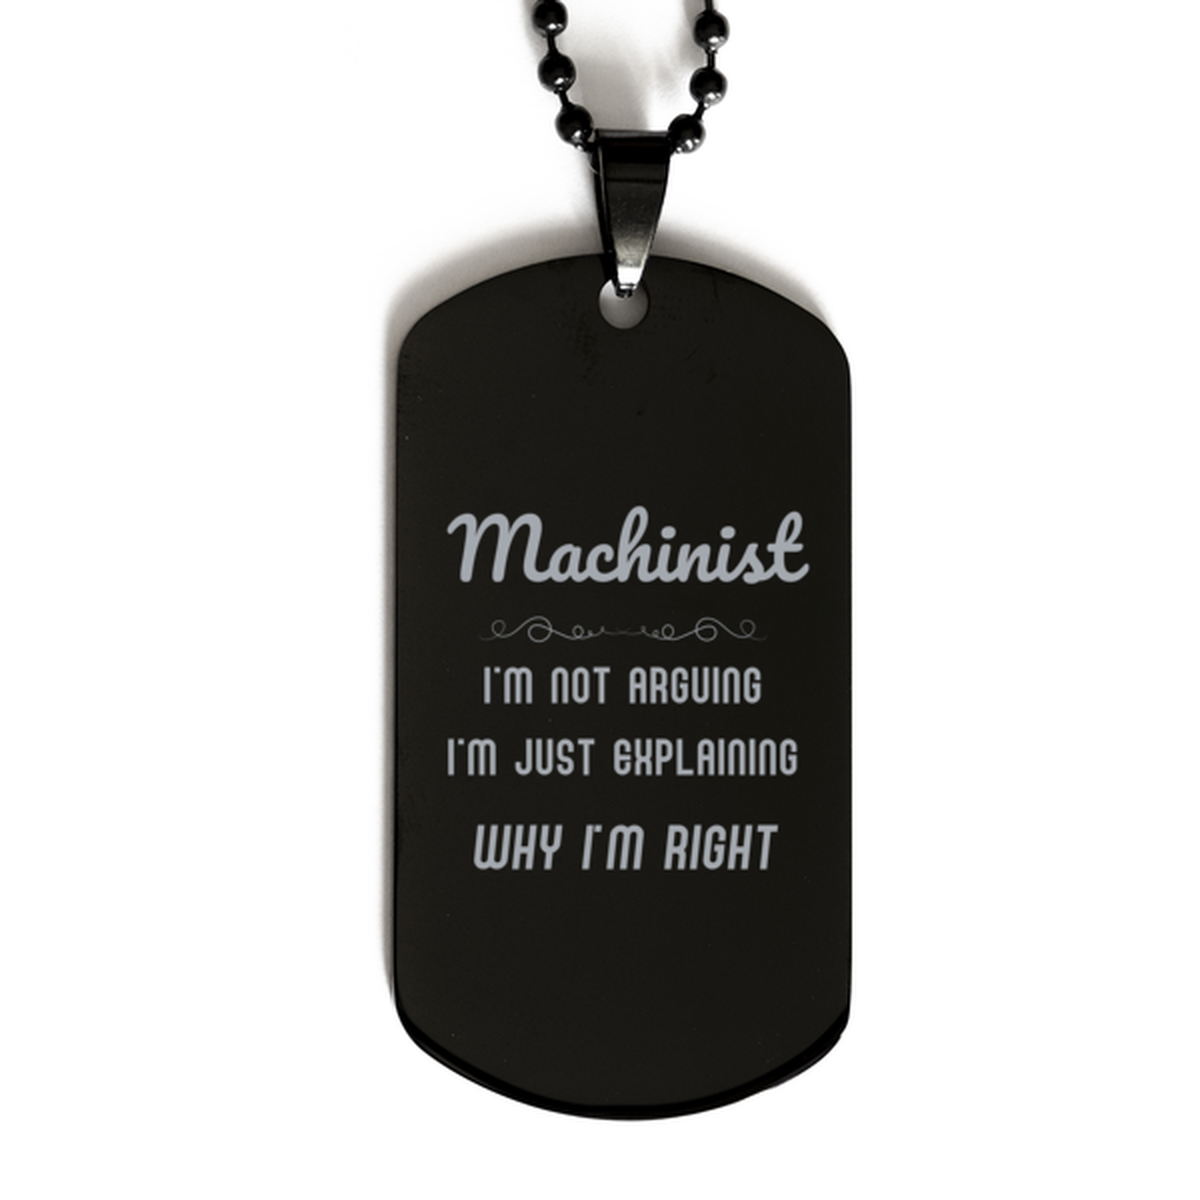 Machinist I'm not Arguing. I'm Just Explaining Why I'm RIGHT Black Dog Tag, Funny Saying Quote Machinist Gifts For Machinist Graduation Birthday Christmas Gifts for Men Women Coworker